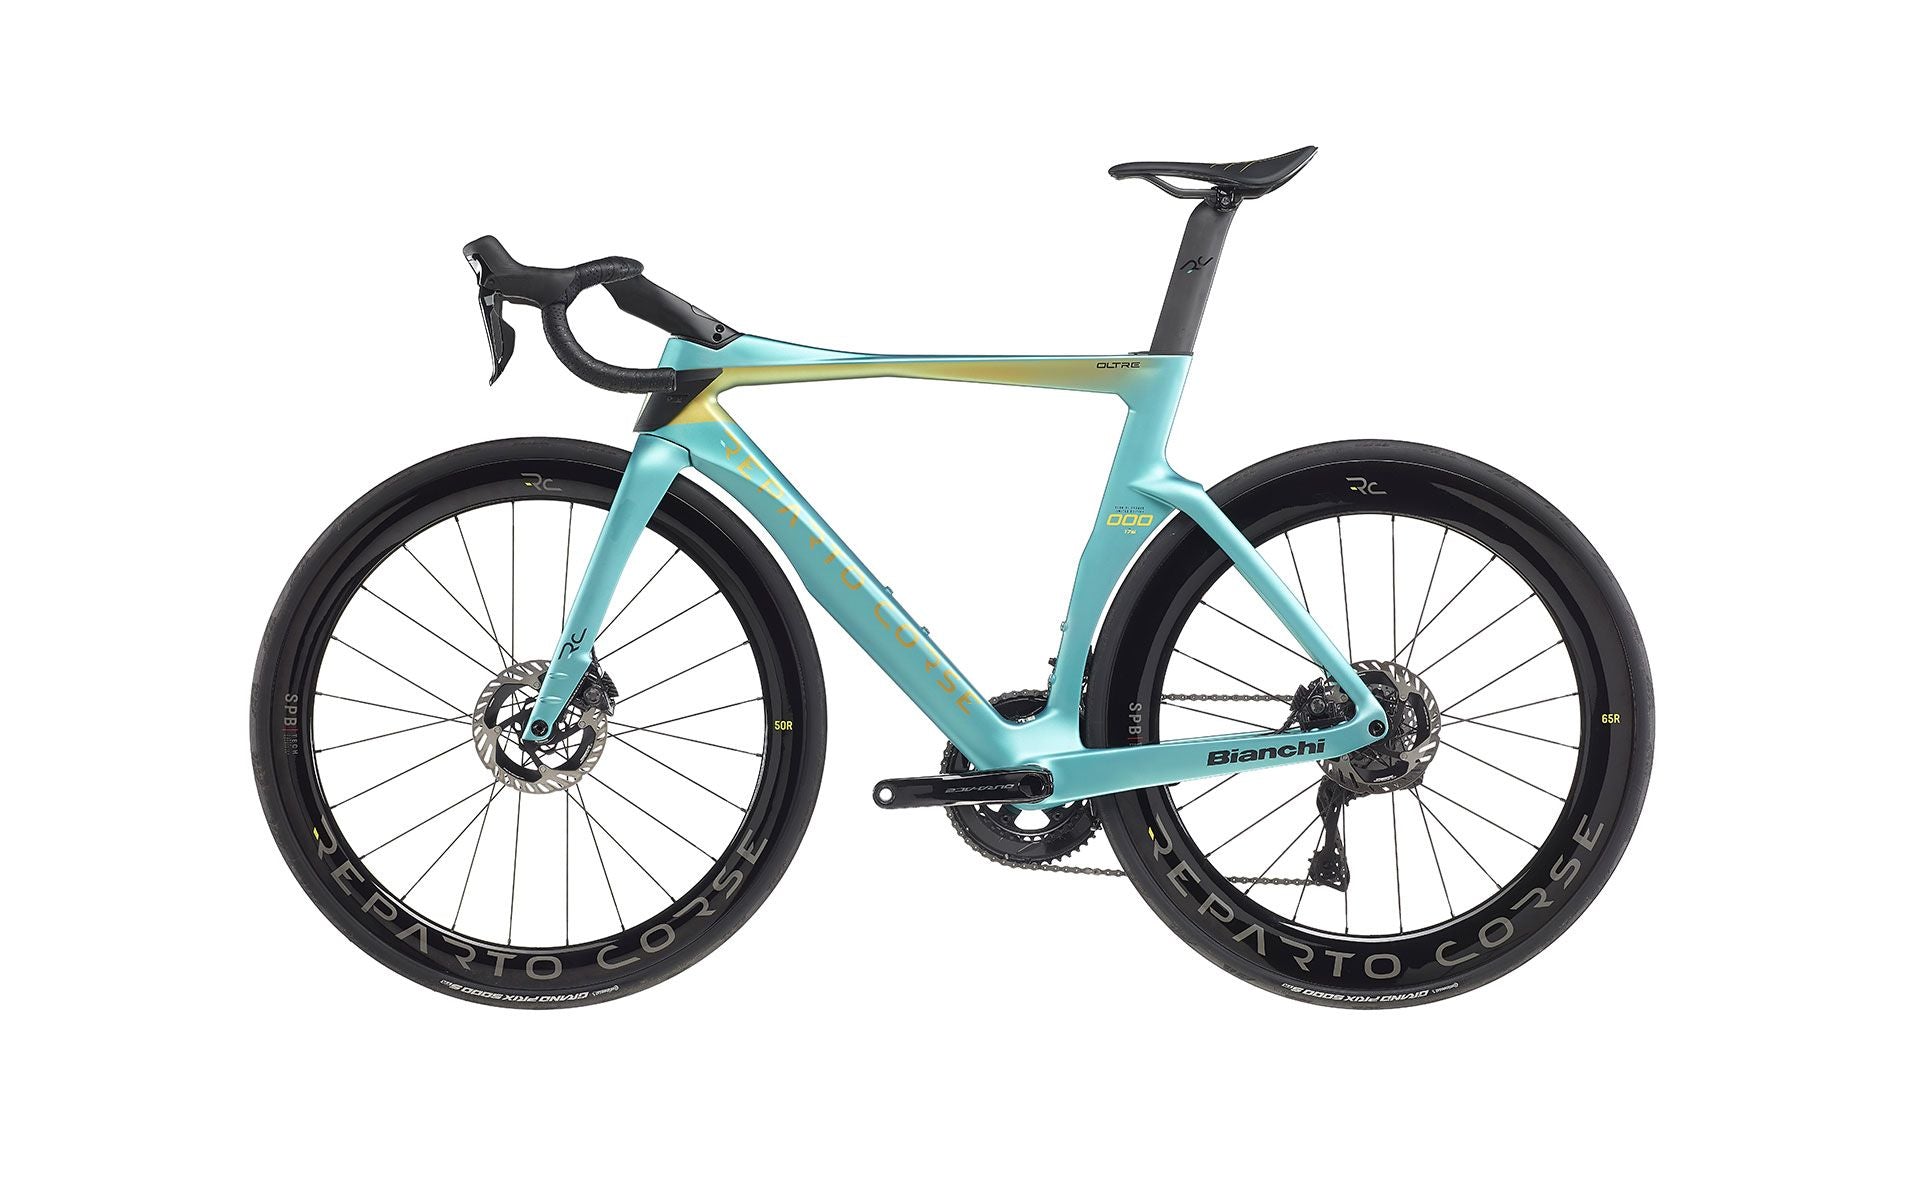 BIANCHI - Oltre Tour the France limited edition